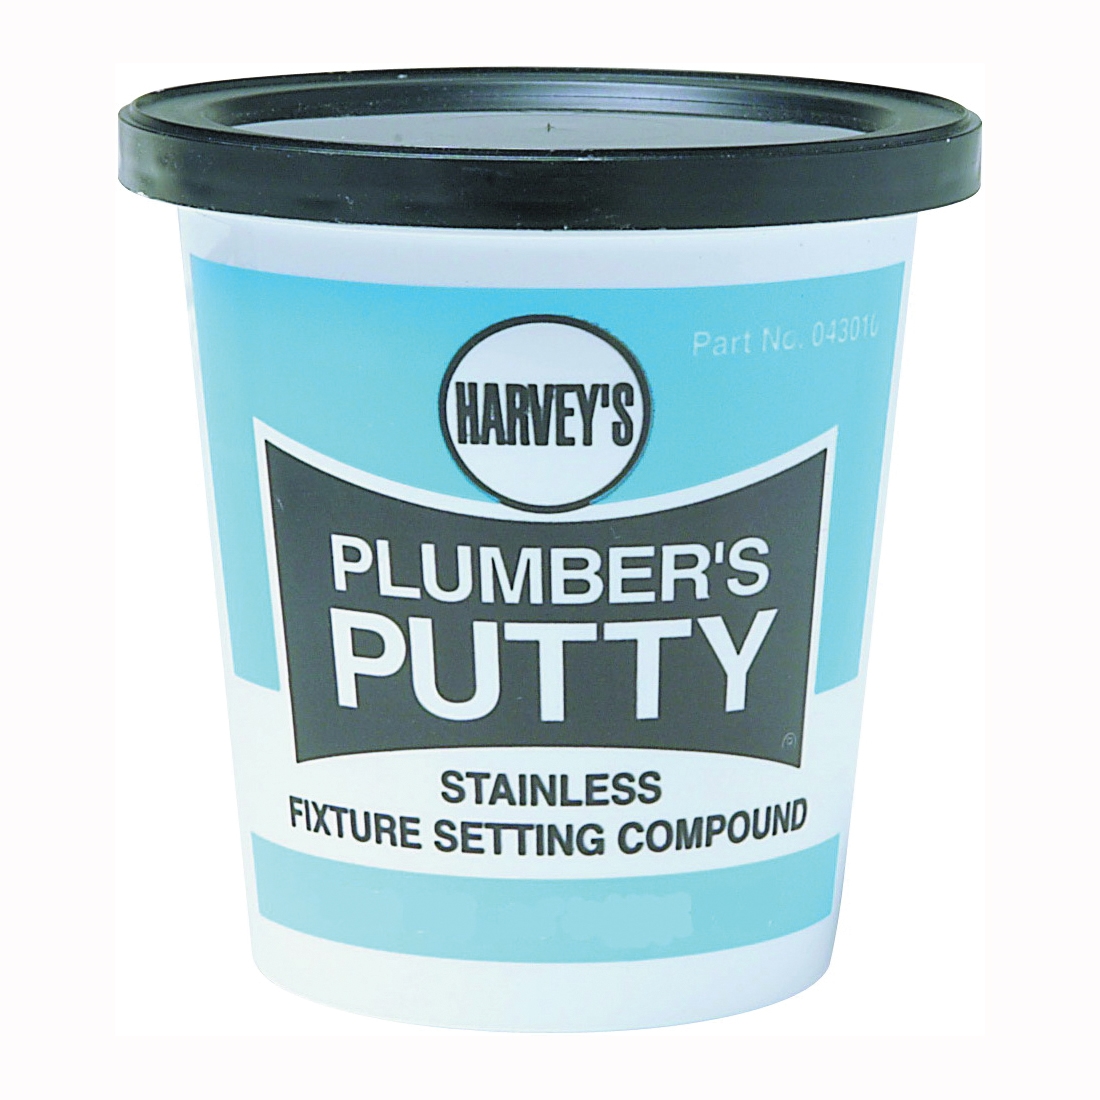 043010 Plumbers Putty, Solid, Off-White, 14 oz Can